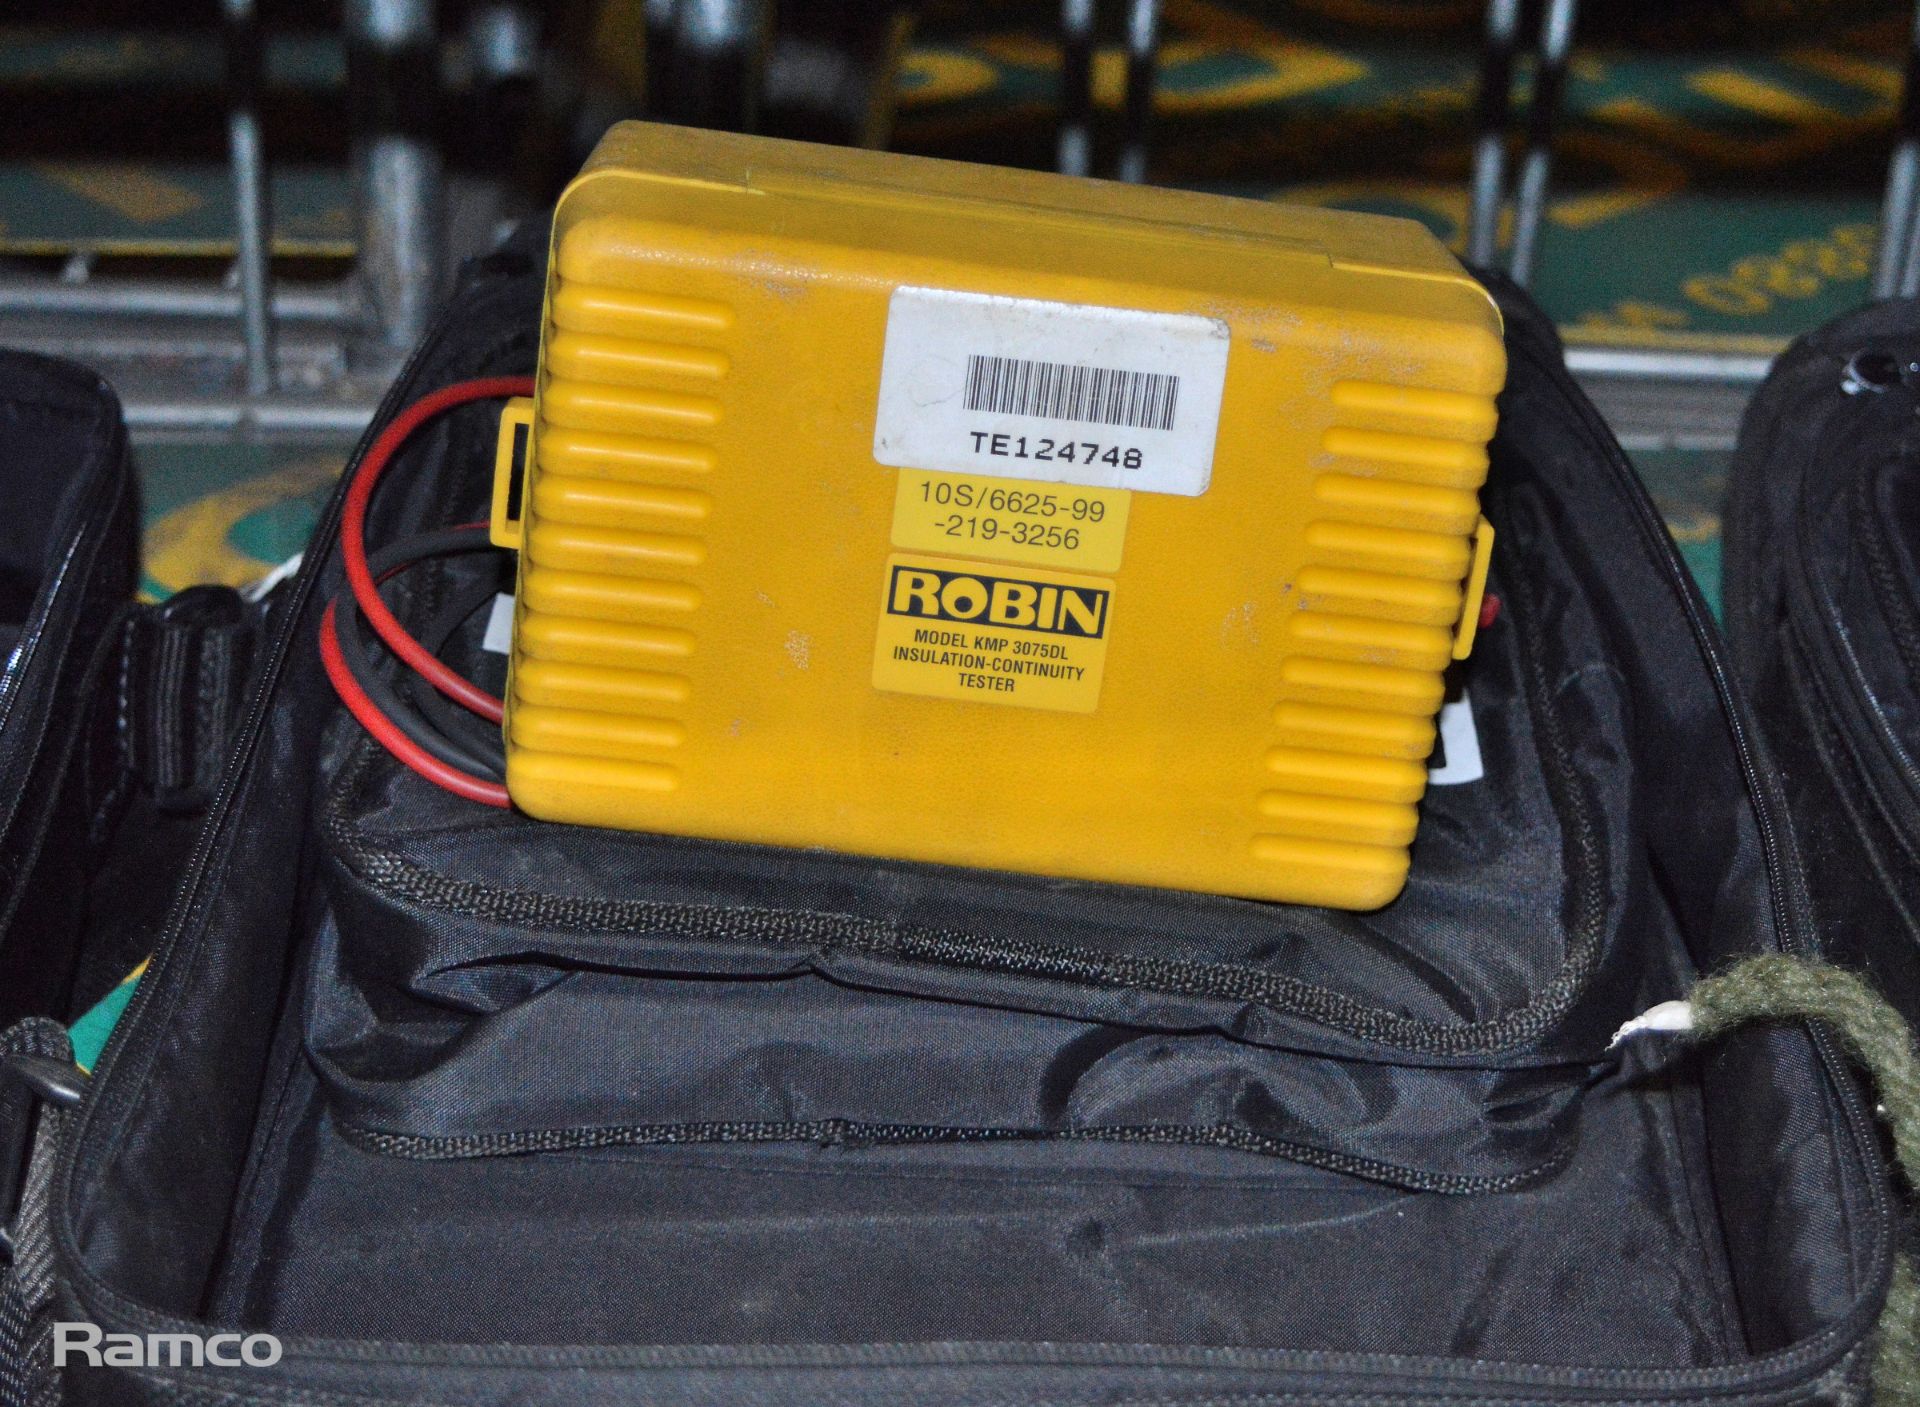 6x Robin KMP3075DL Insulation Continuity Testers in case - Image 2 of 2